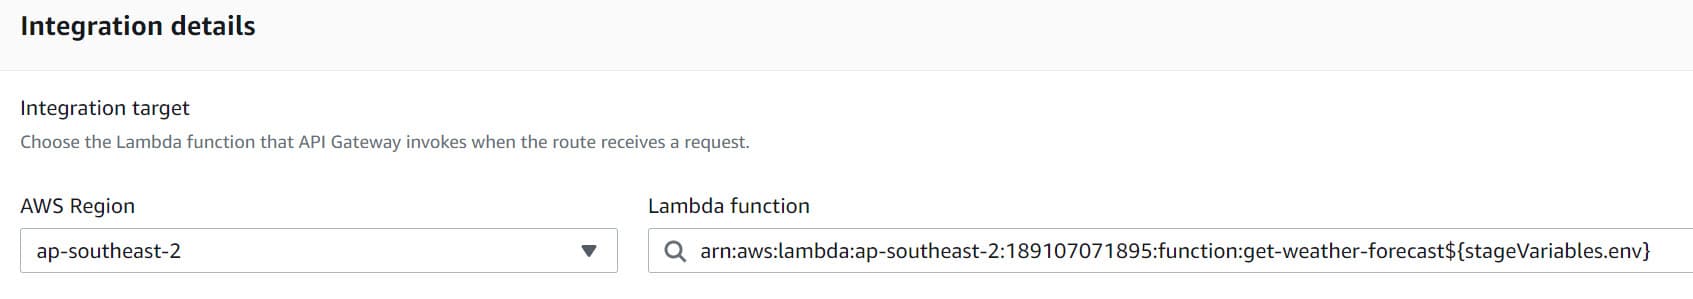 Use stage variables when specifying lambda integration for AWS API Gateway route integration.